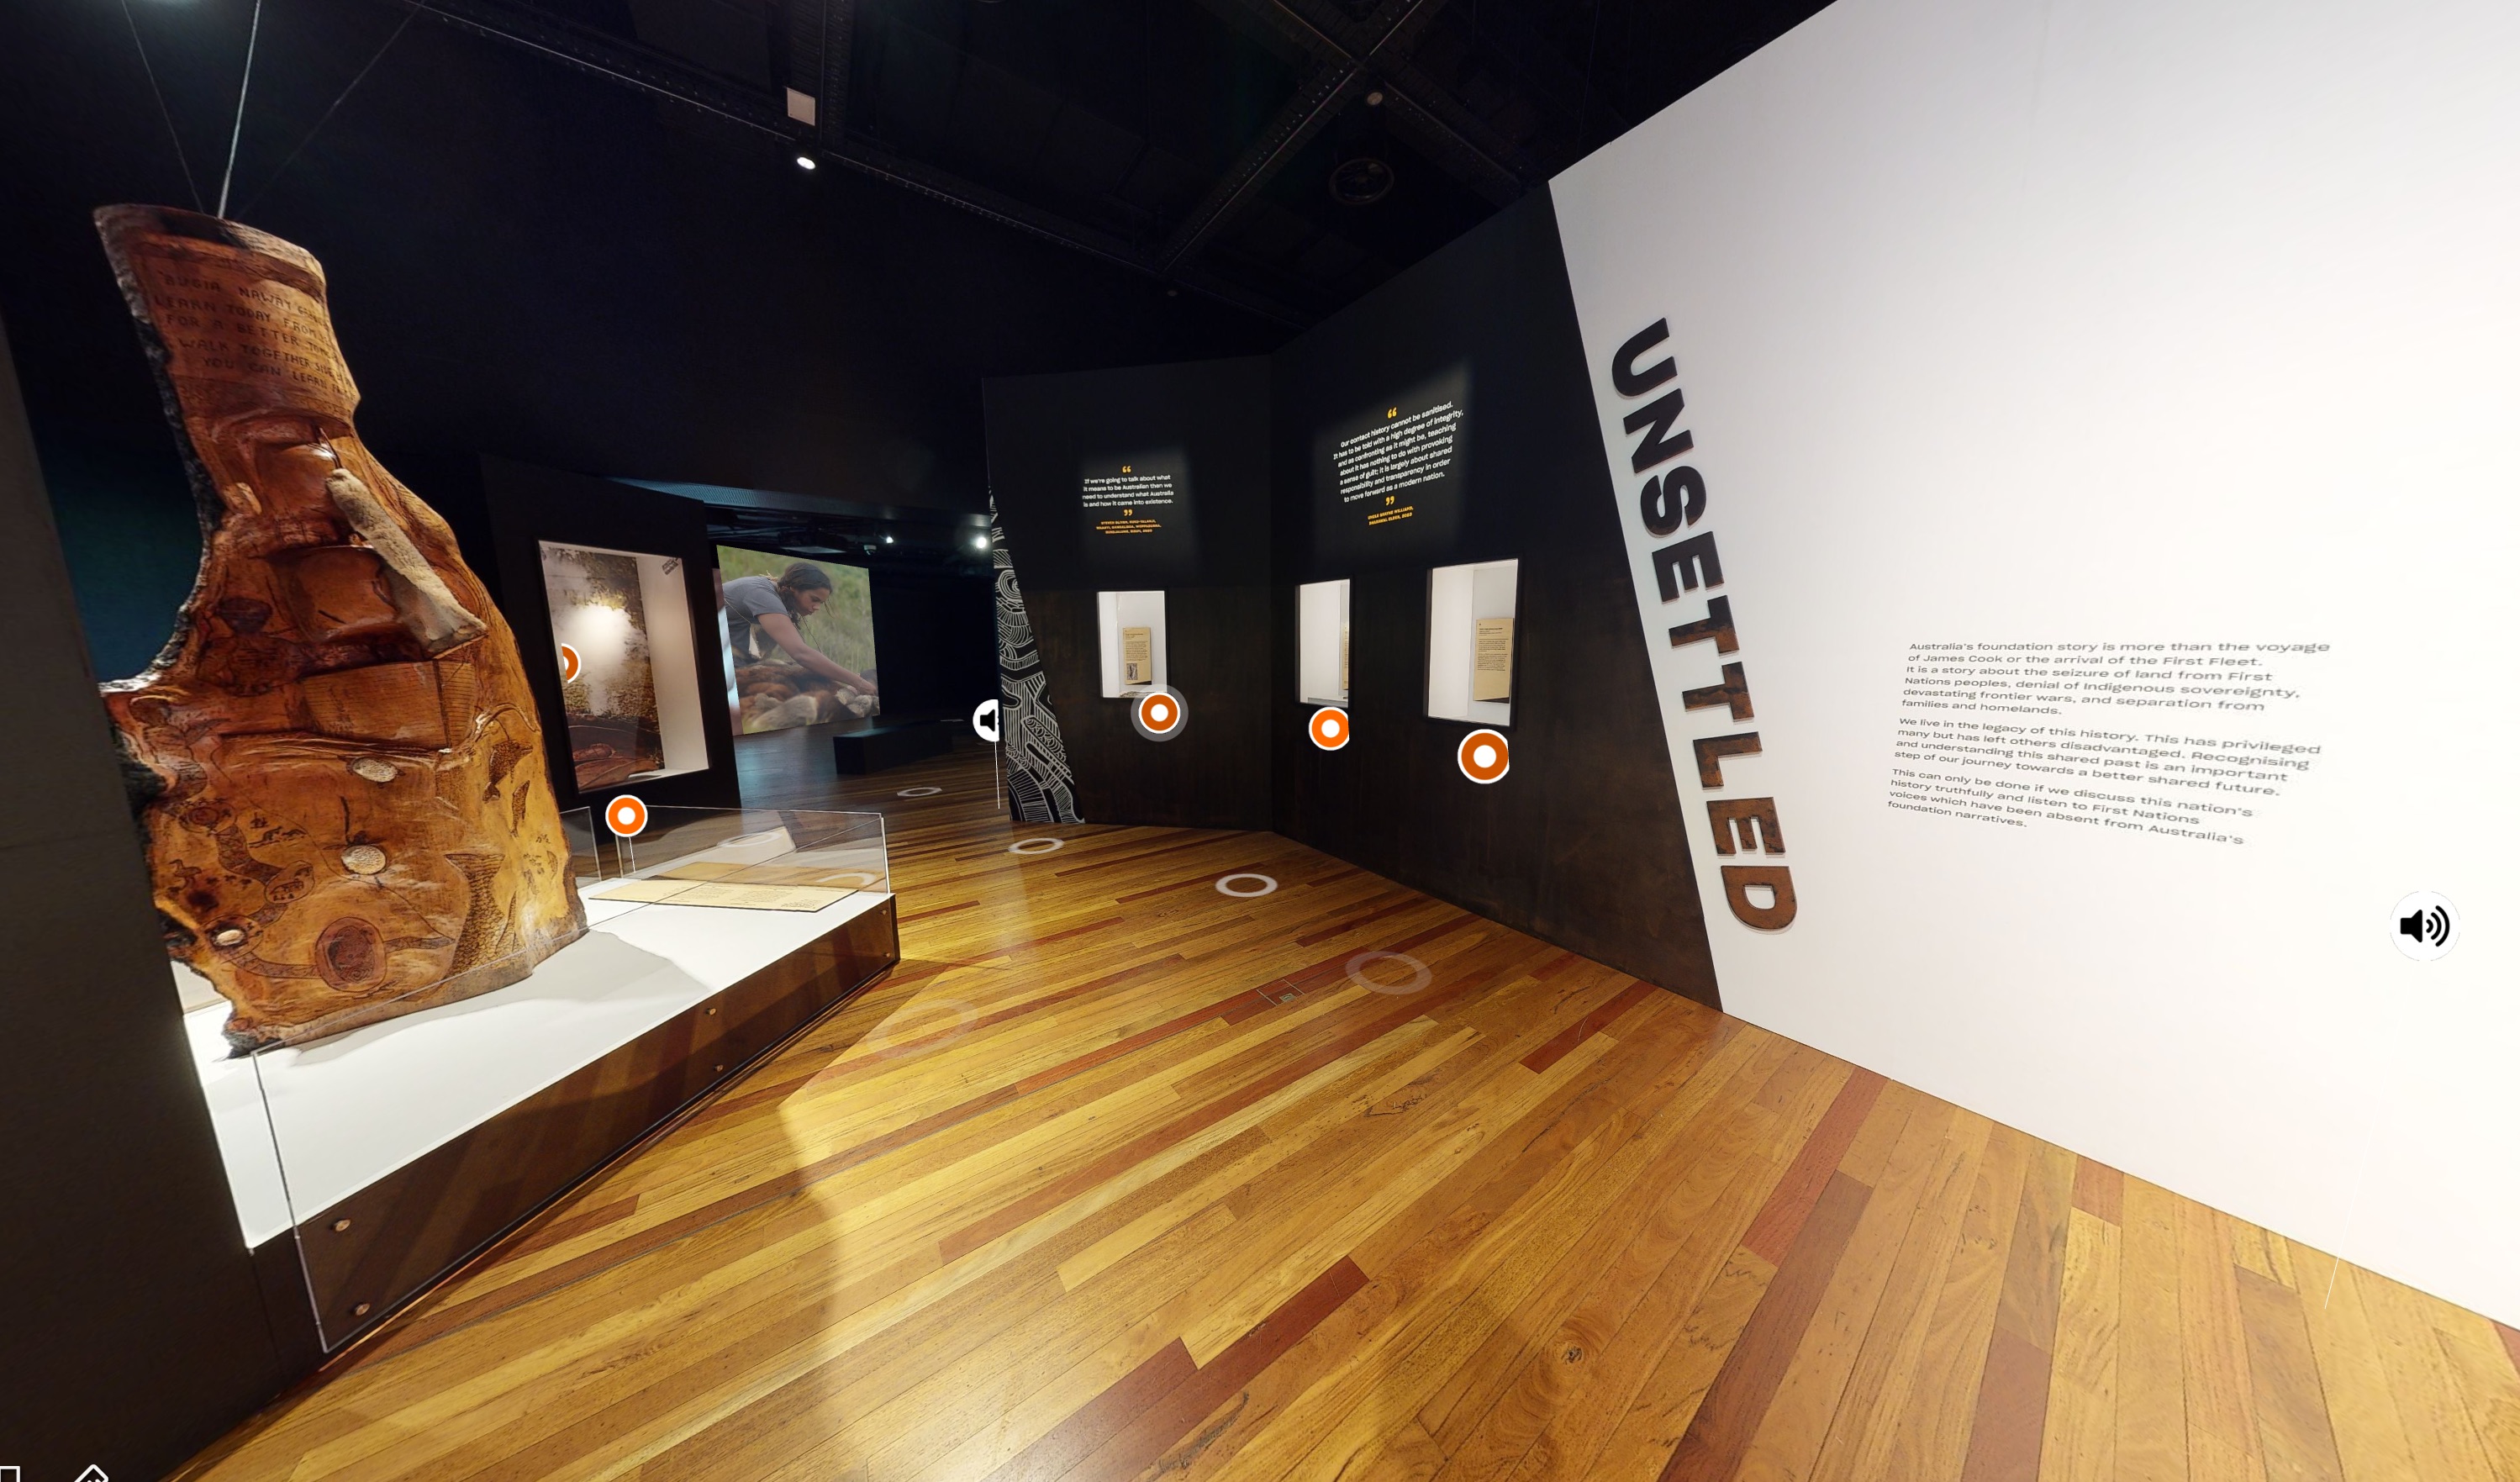 A screenshot taken from the virtual tour of the Australian Museum’s Unsettled exhibit. The gallery space has wooden floors and black and white walls. Displayed on these walls are various objects and text for object labels. Below each of these objects is an orange circle for visitors to click on for more information.